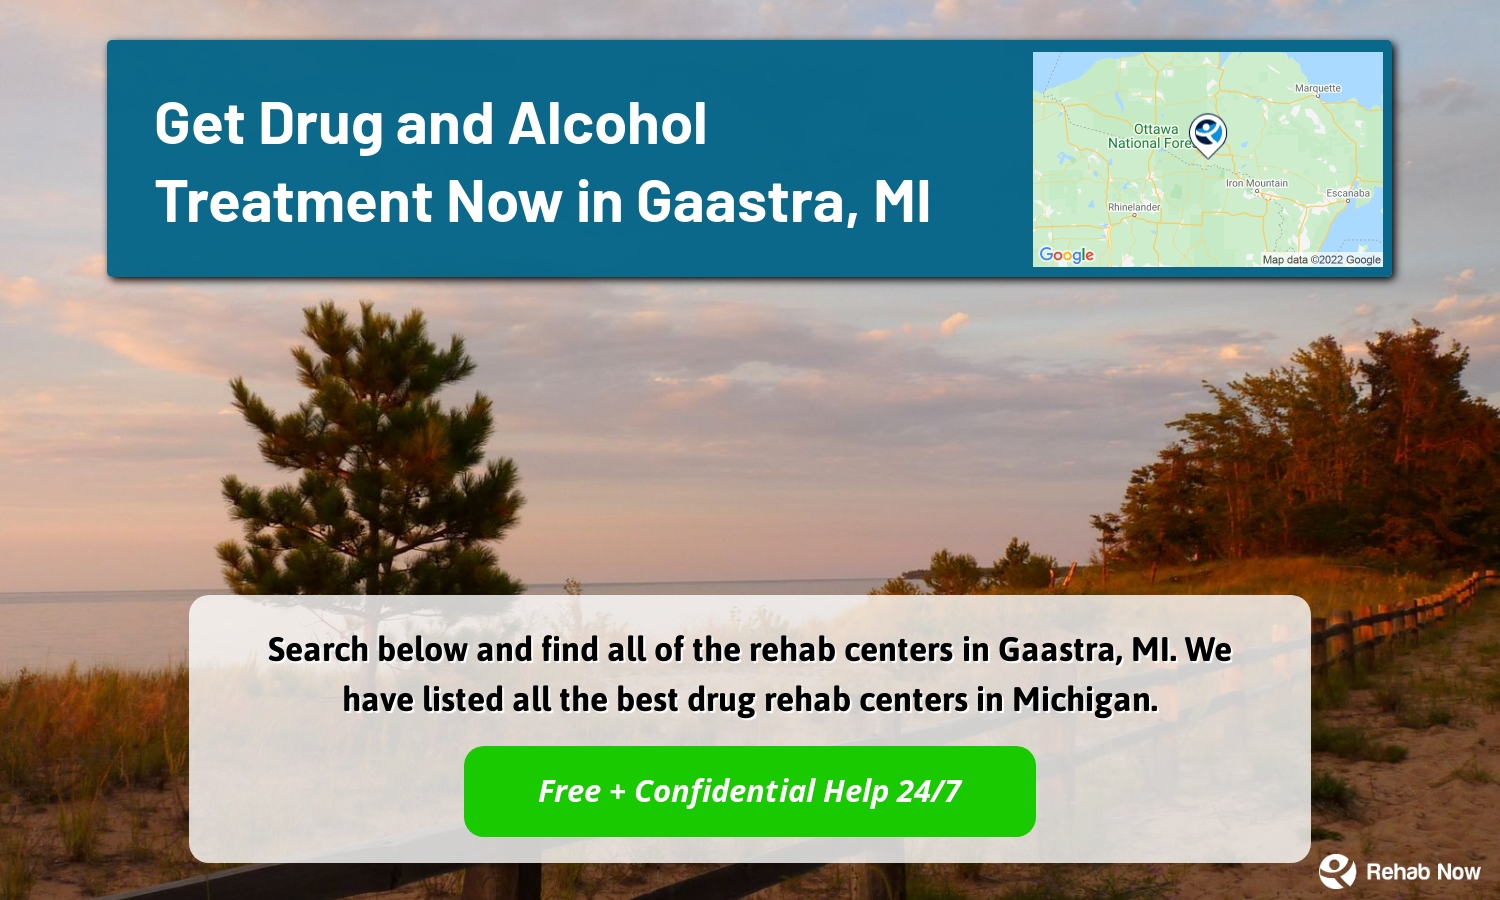 Search below and find all of the rehab centers in Gaastra, MI. We have listed all the best drug rehab centers in Michigan.